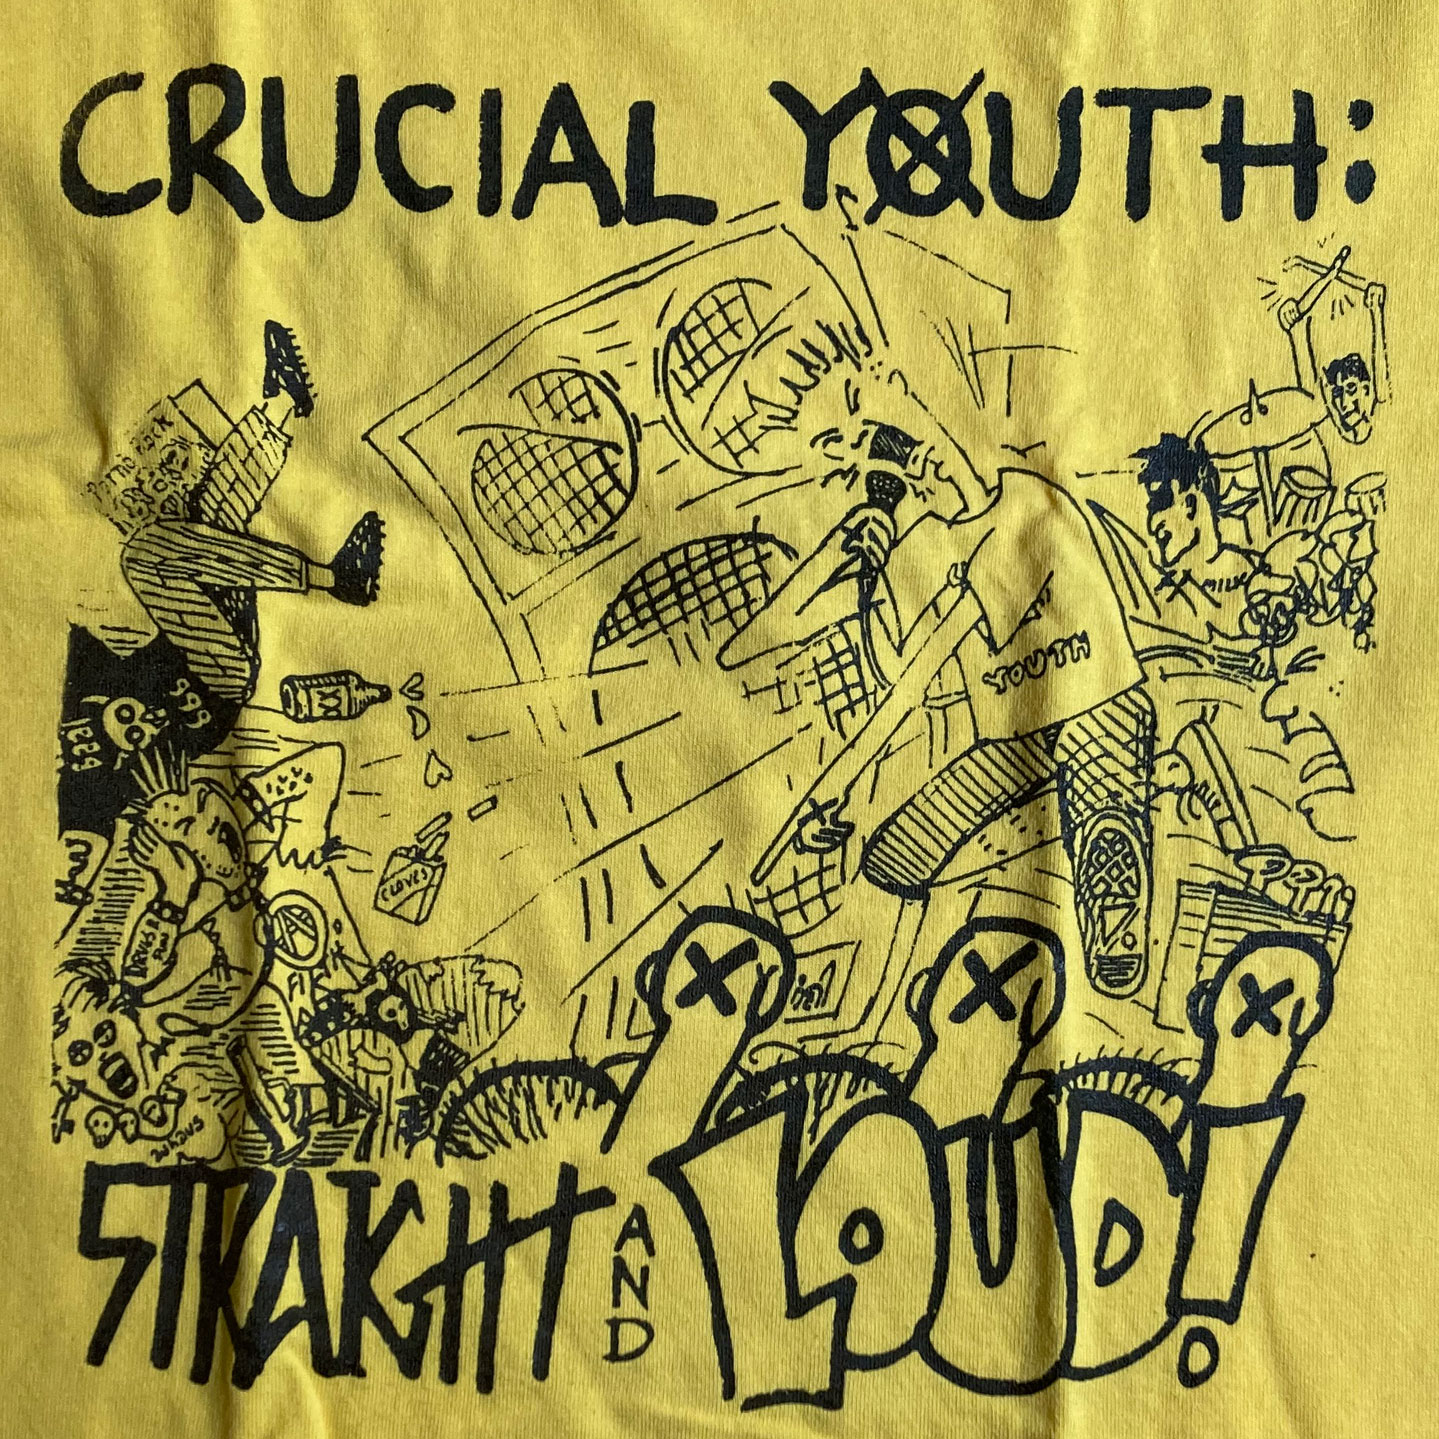 USED! CRUCIAL YOUTH Tシャツ STRAIGHT AND LOUD!